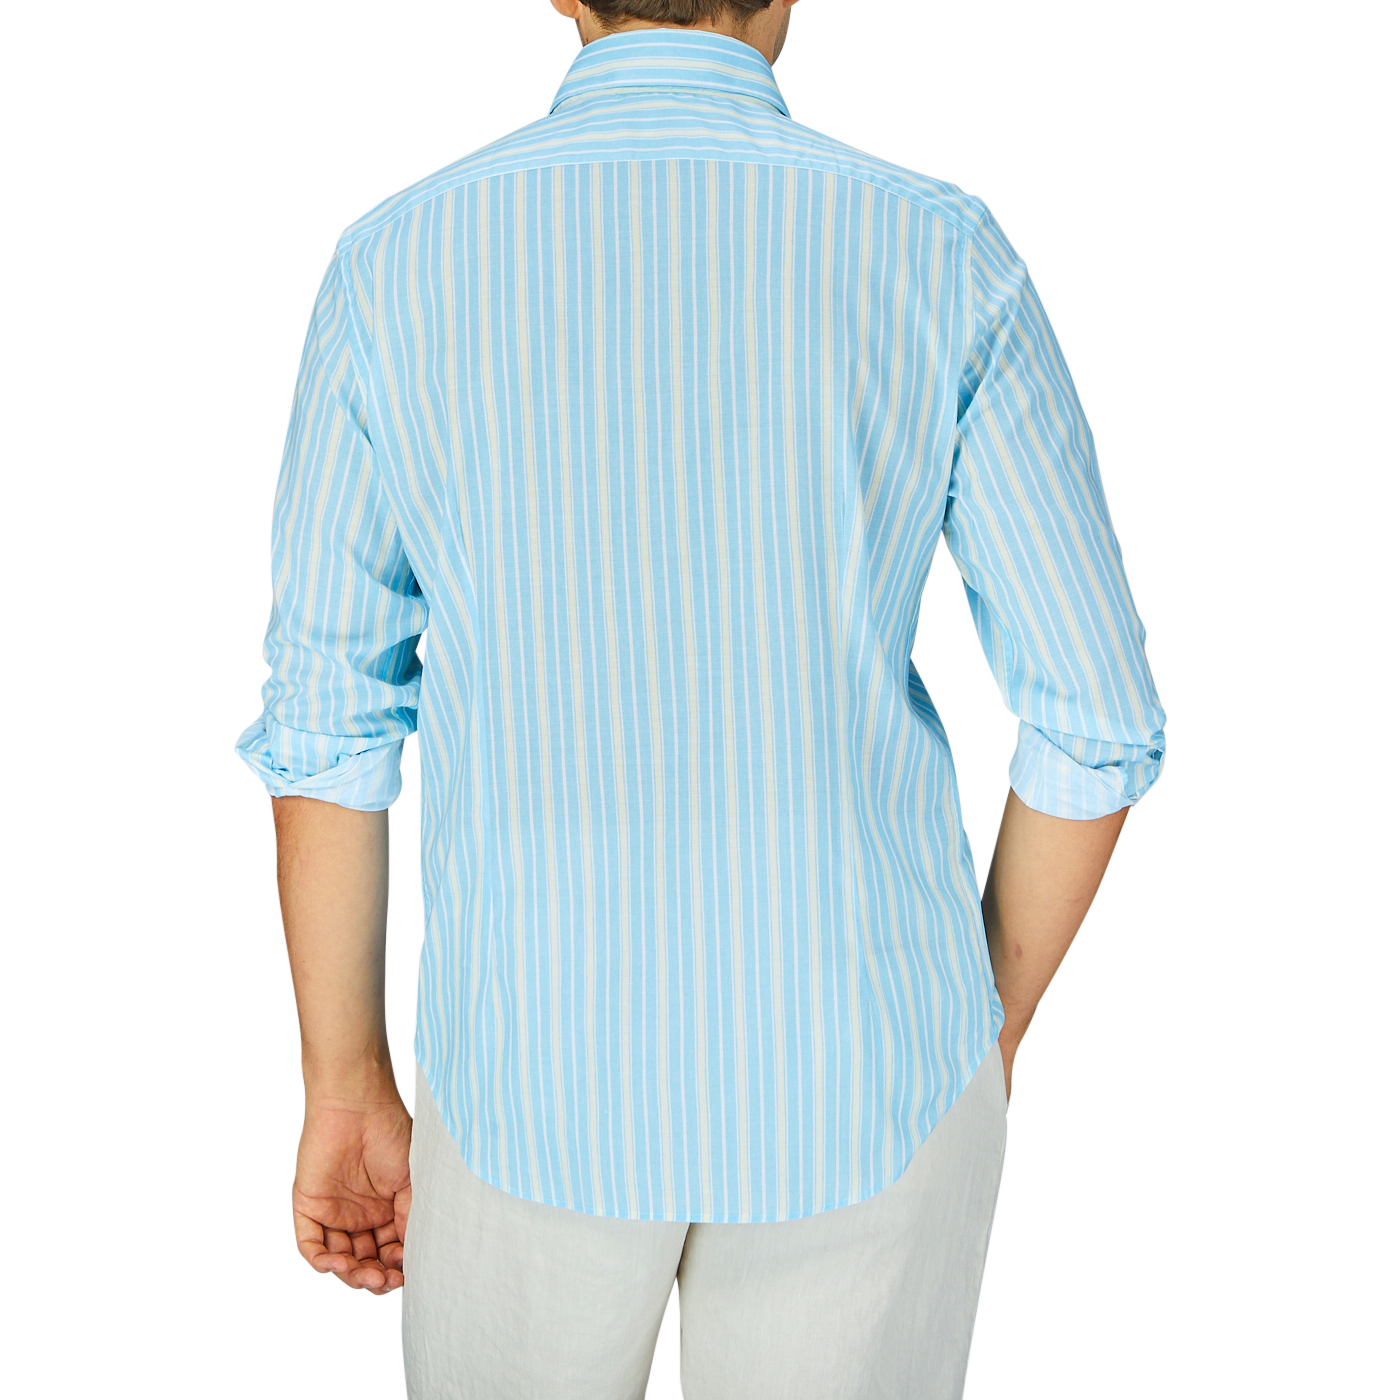 A person standing with their back to the camera, wearing a Fedeli Sky Blue Yellow Striped Cotton Beach Shirt and white pants.